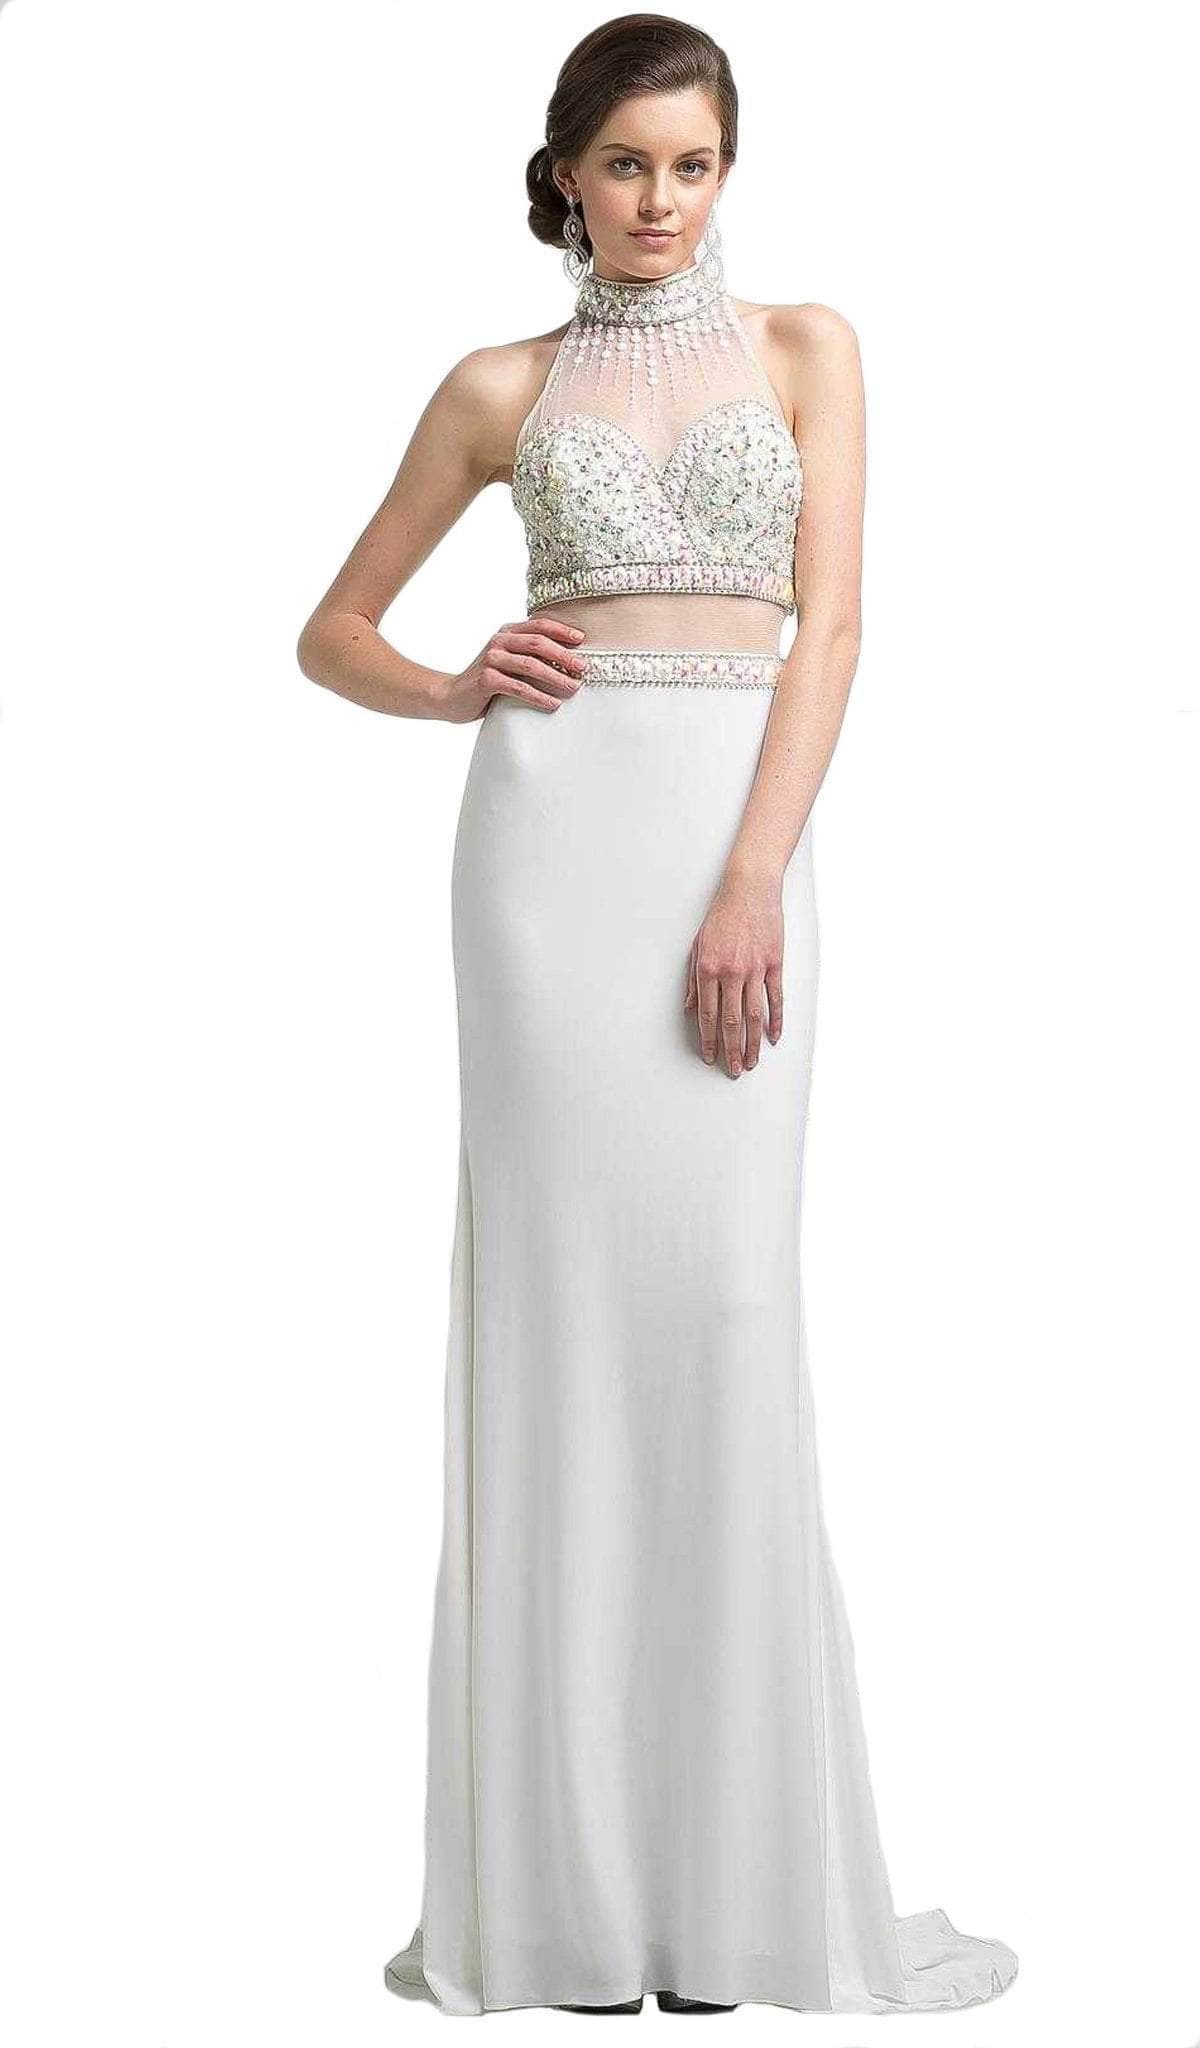 Ladivine KD087 Special Occasion Dress 2 / Ivory